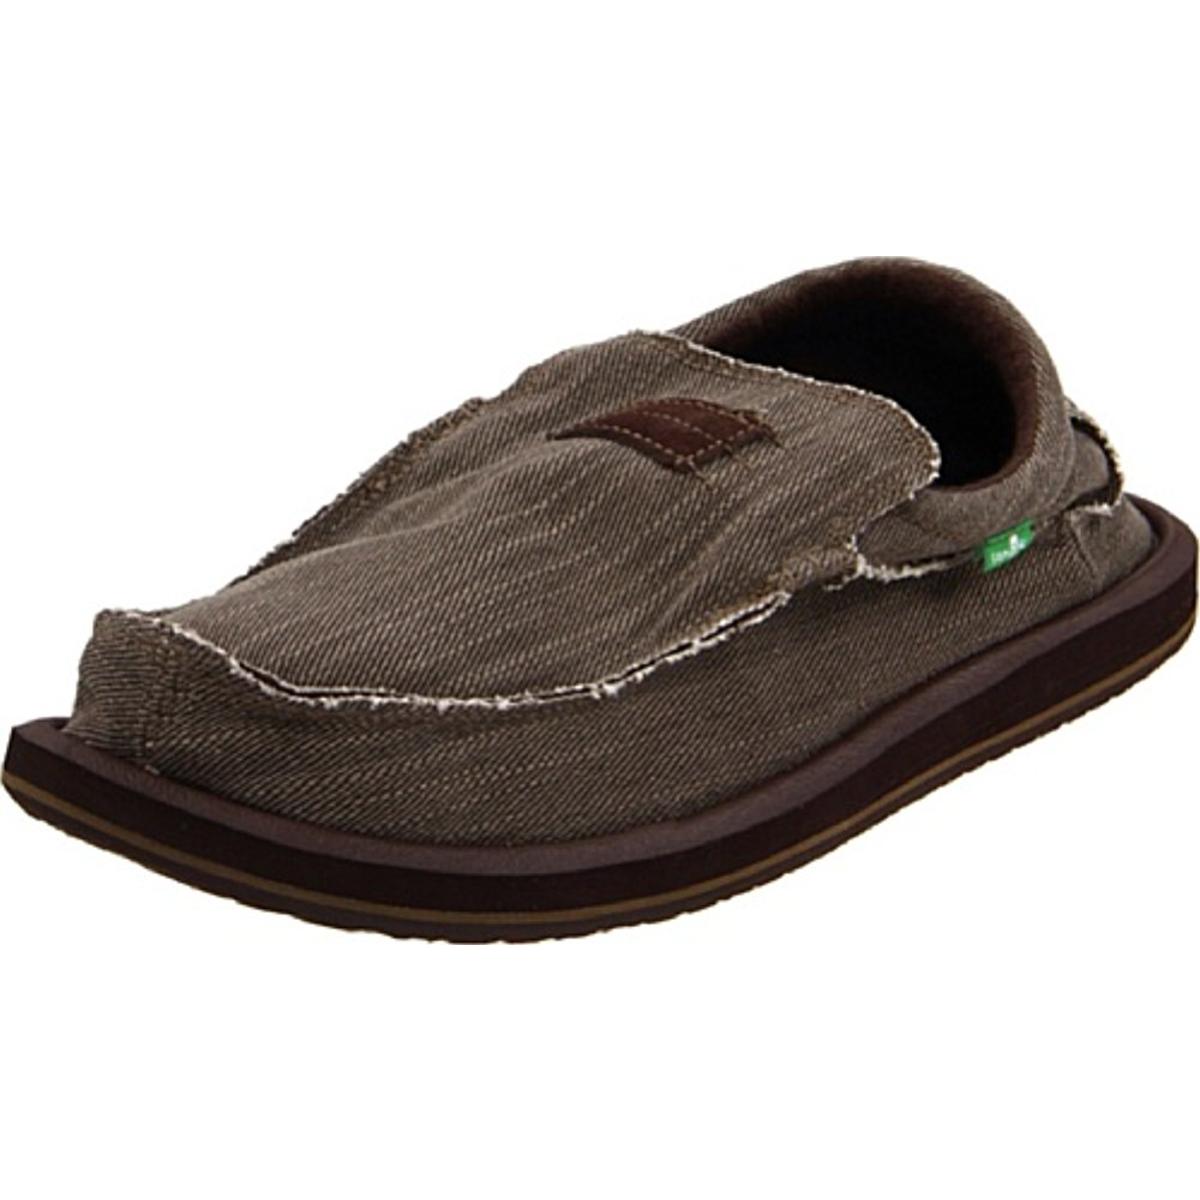 Sanuk 9428 Mens Kyoto Canvas Casual Loafers Shoes BHFO